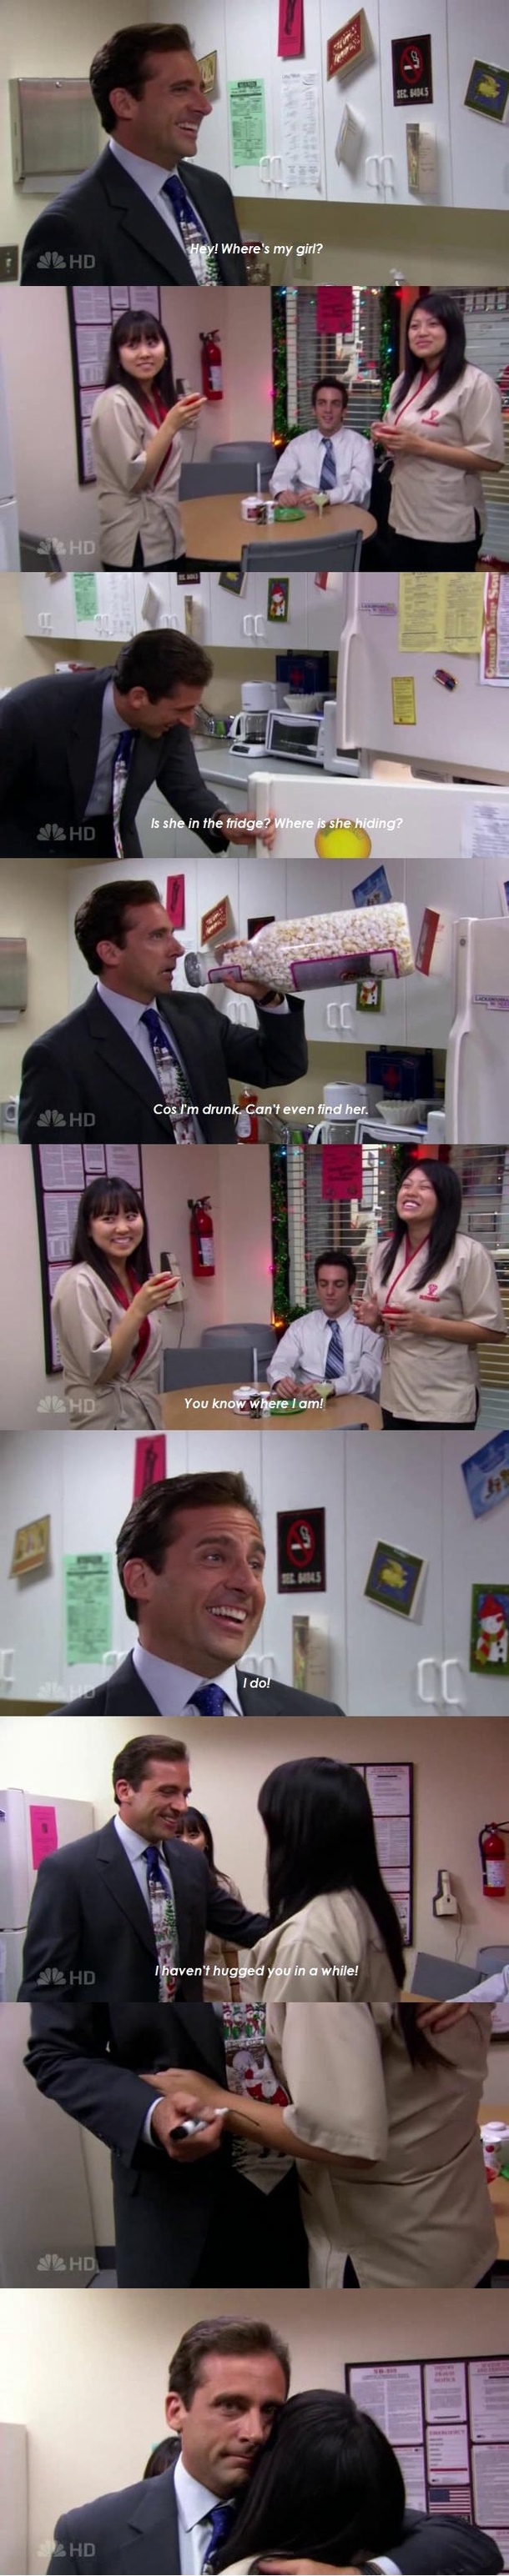 Michael forgetting which one was his date is one of the funniest scenes from The Office